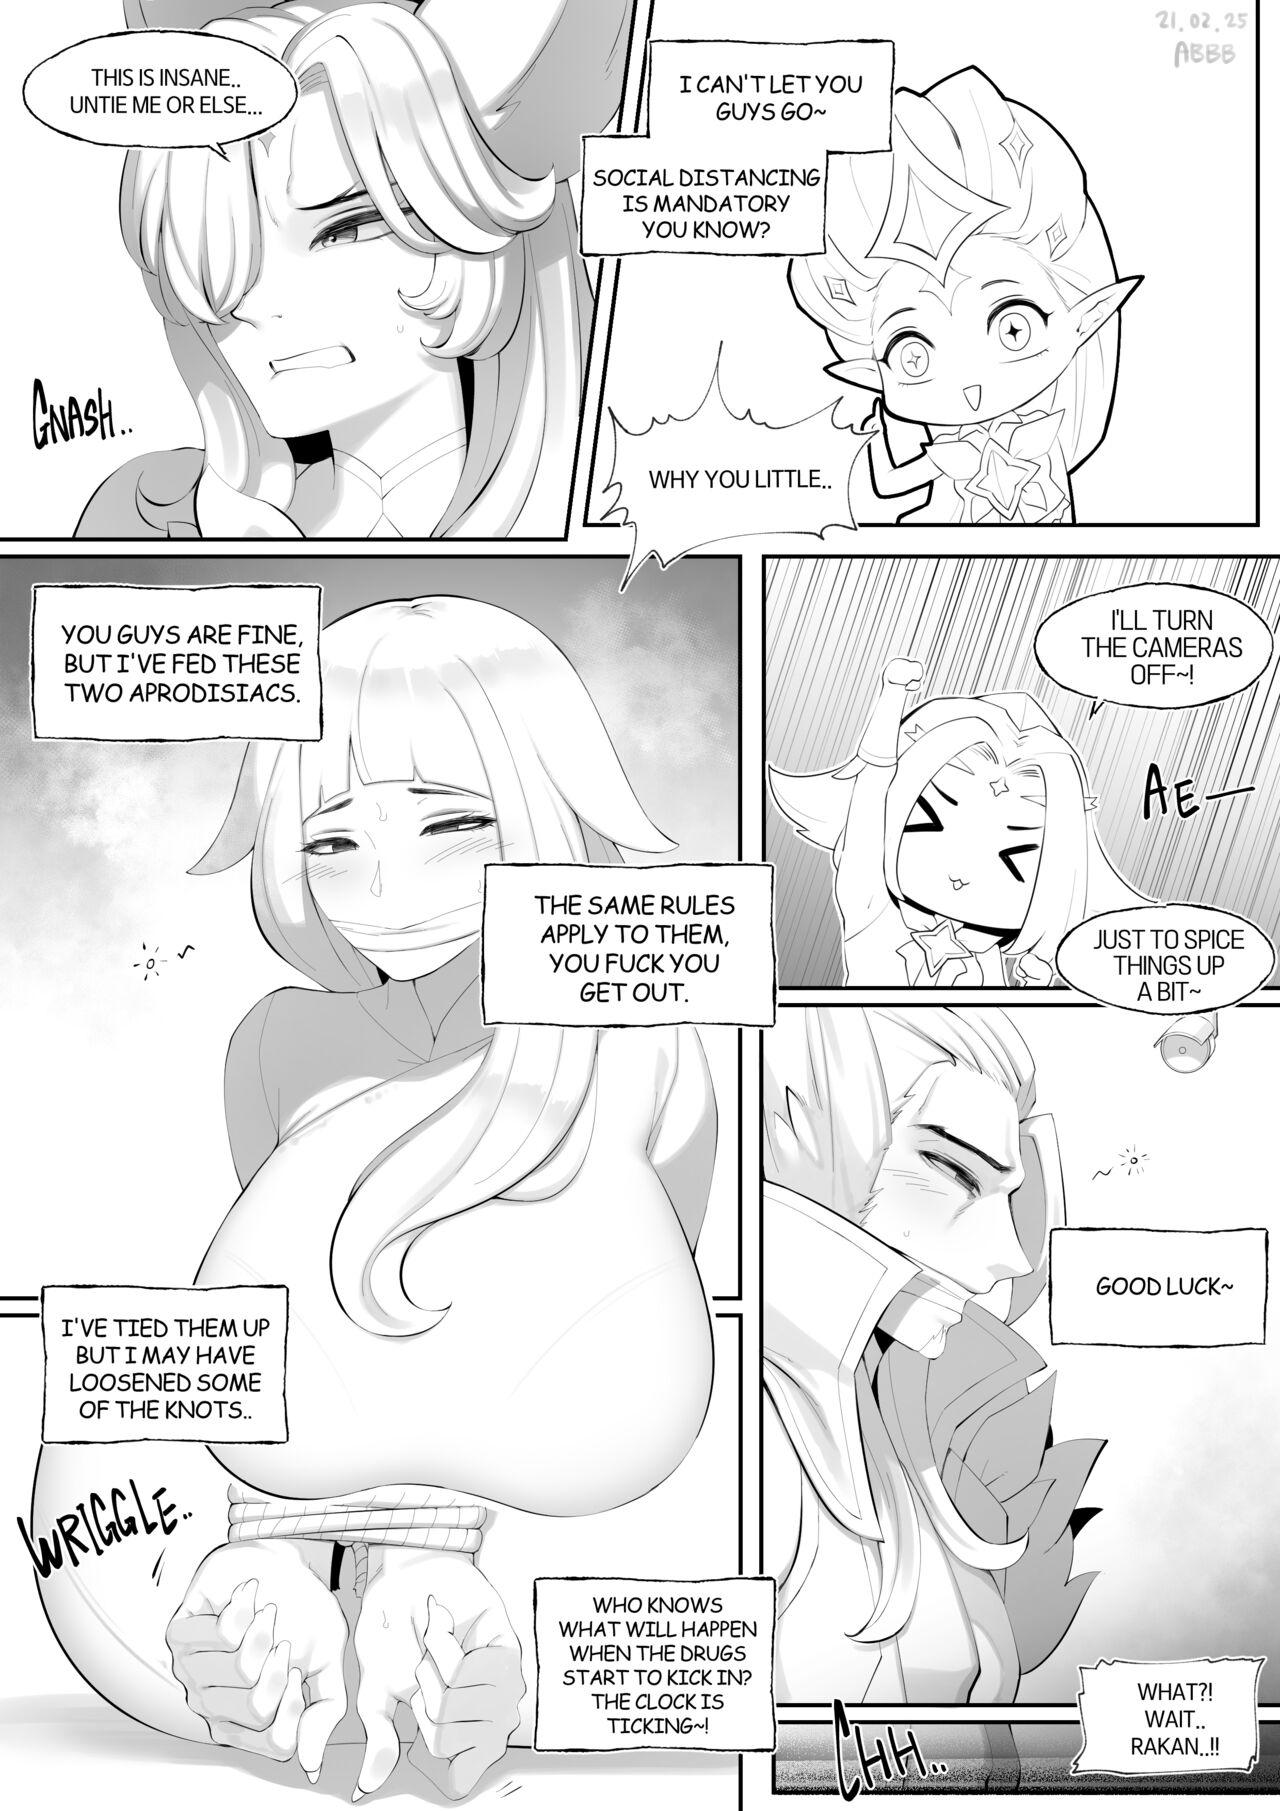 Old Vs Young Xayah Star Guardian - League of legends Cei - Page 2